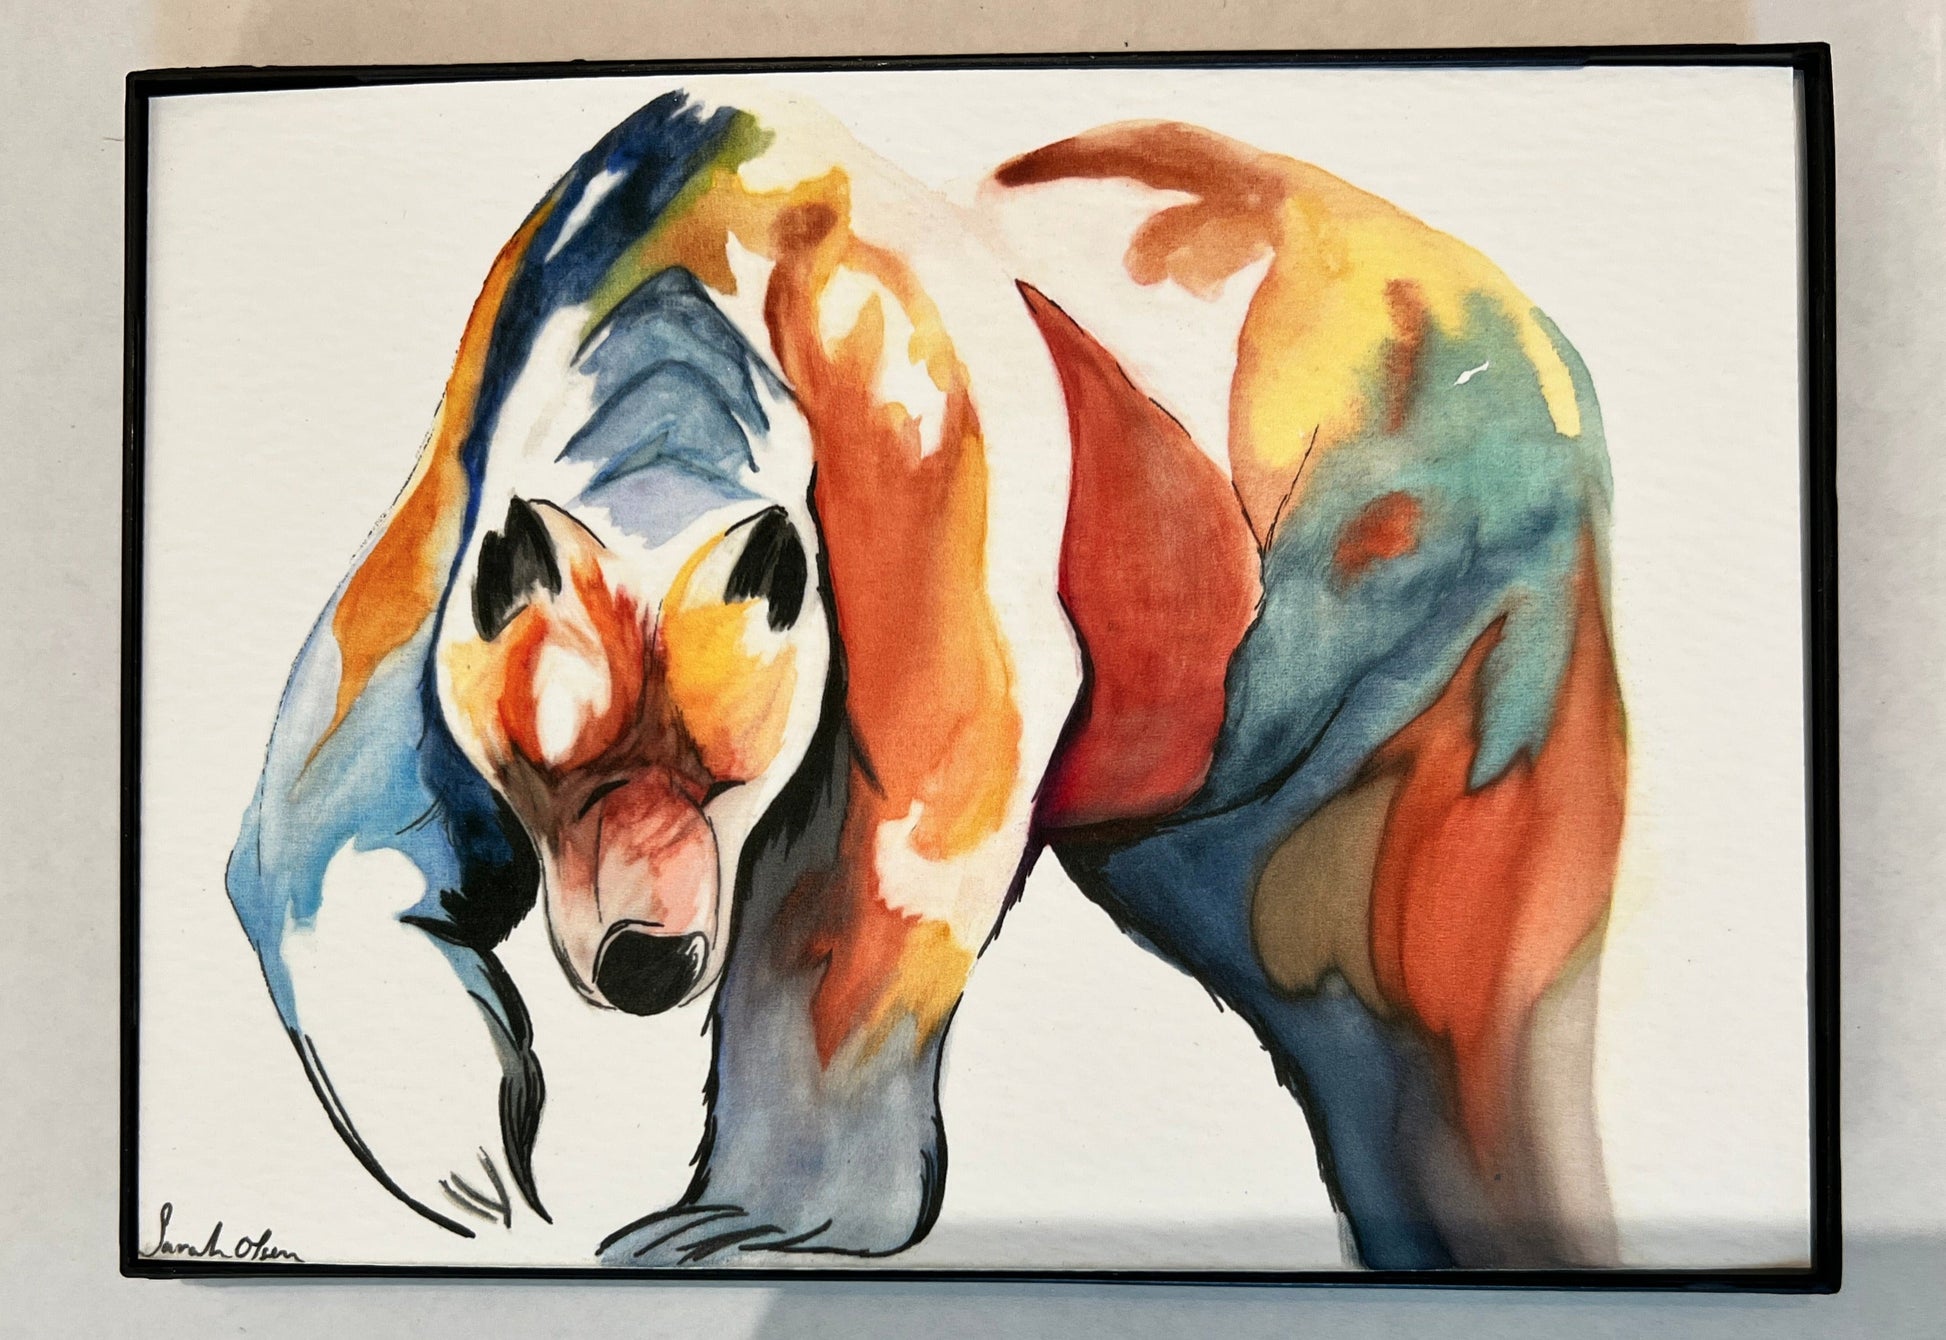 " Bearly There " Framed Watercolor Print Artist: Sarah Olsen Print from an Original Watercolor Painting  Bear walking with right paw up off the ground  Multicolored bear  Natural with an abstract look  Choose From:  Print  Framed 5" long x 7" high print  Printed on watercolor paper  In a slim black plastic frame